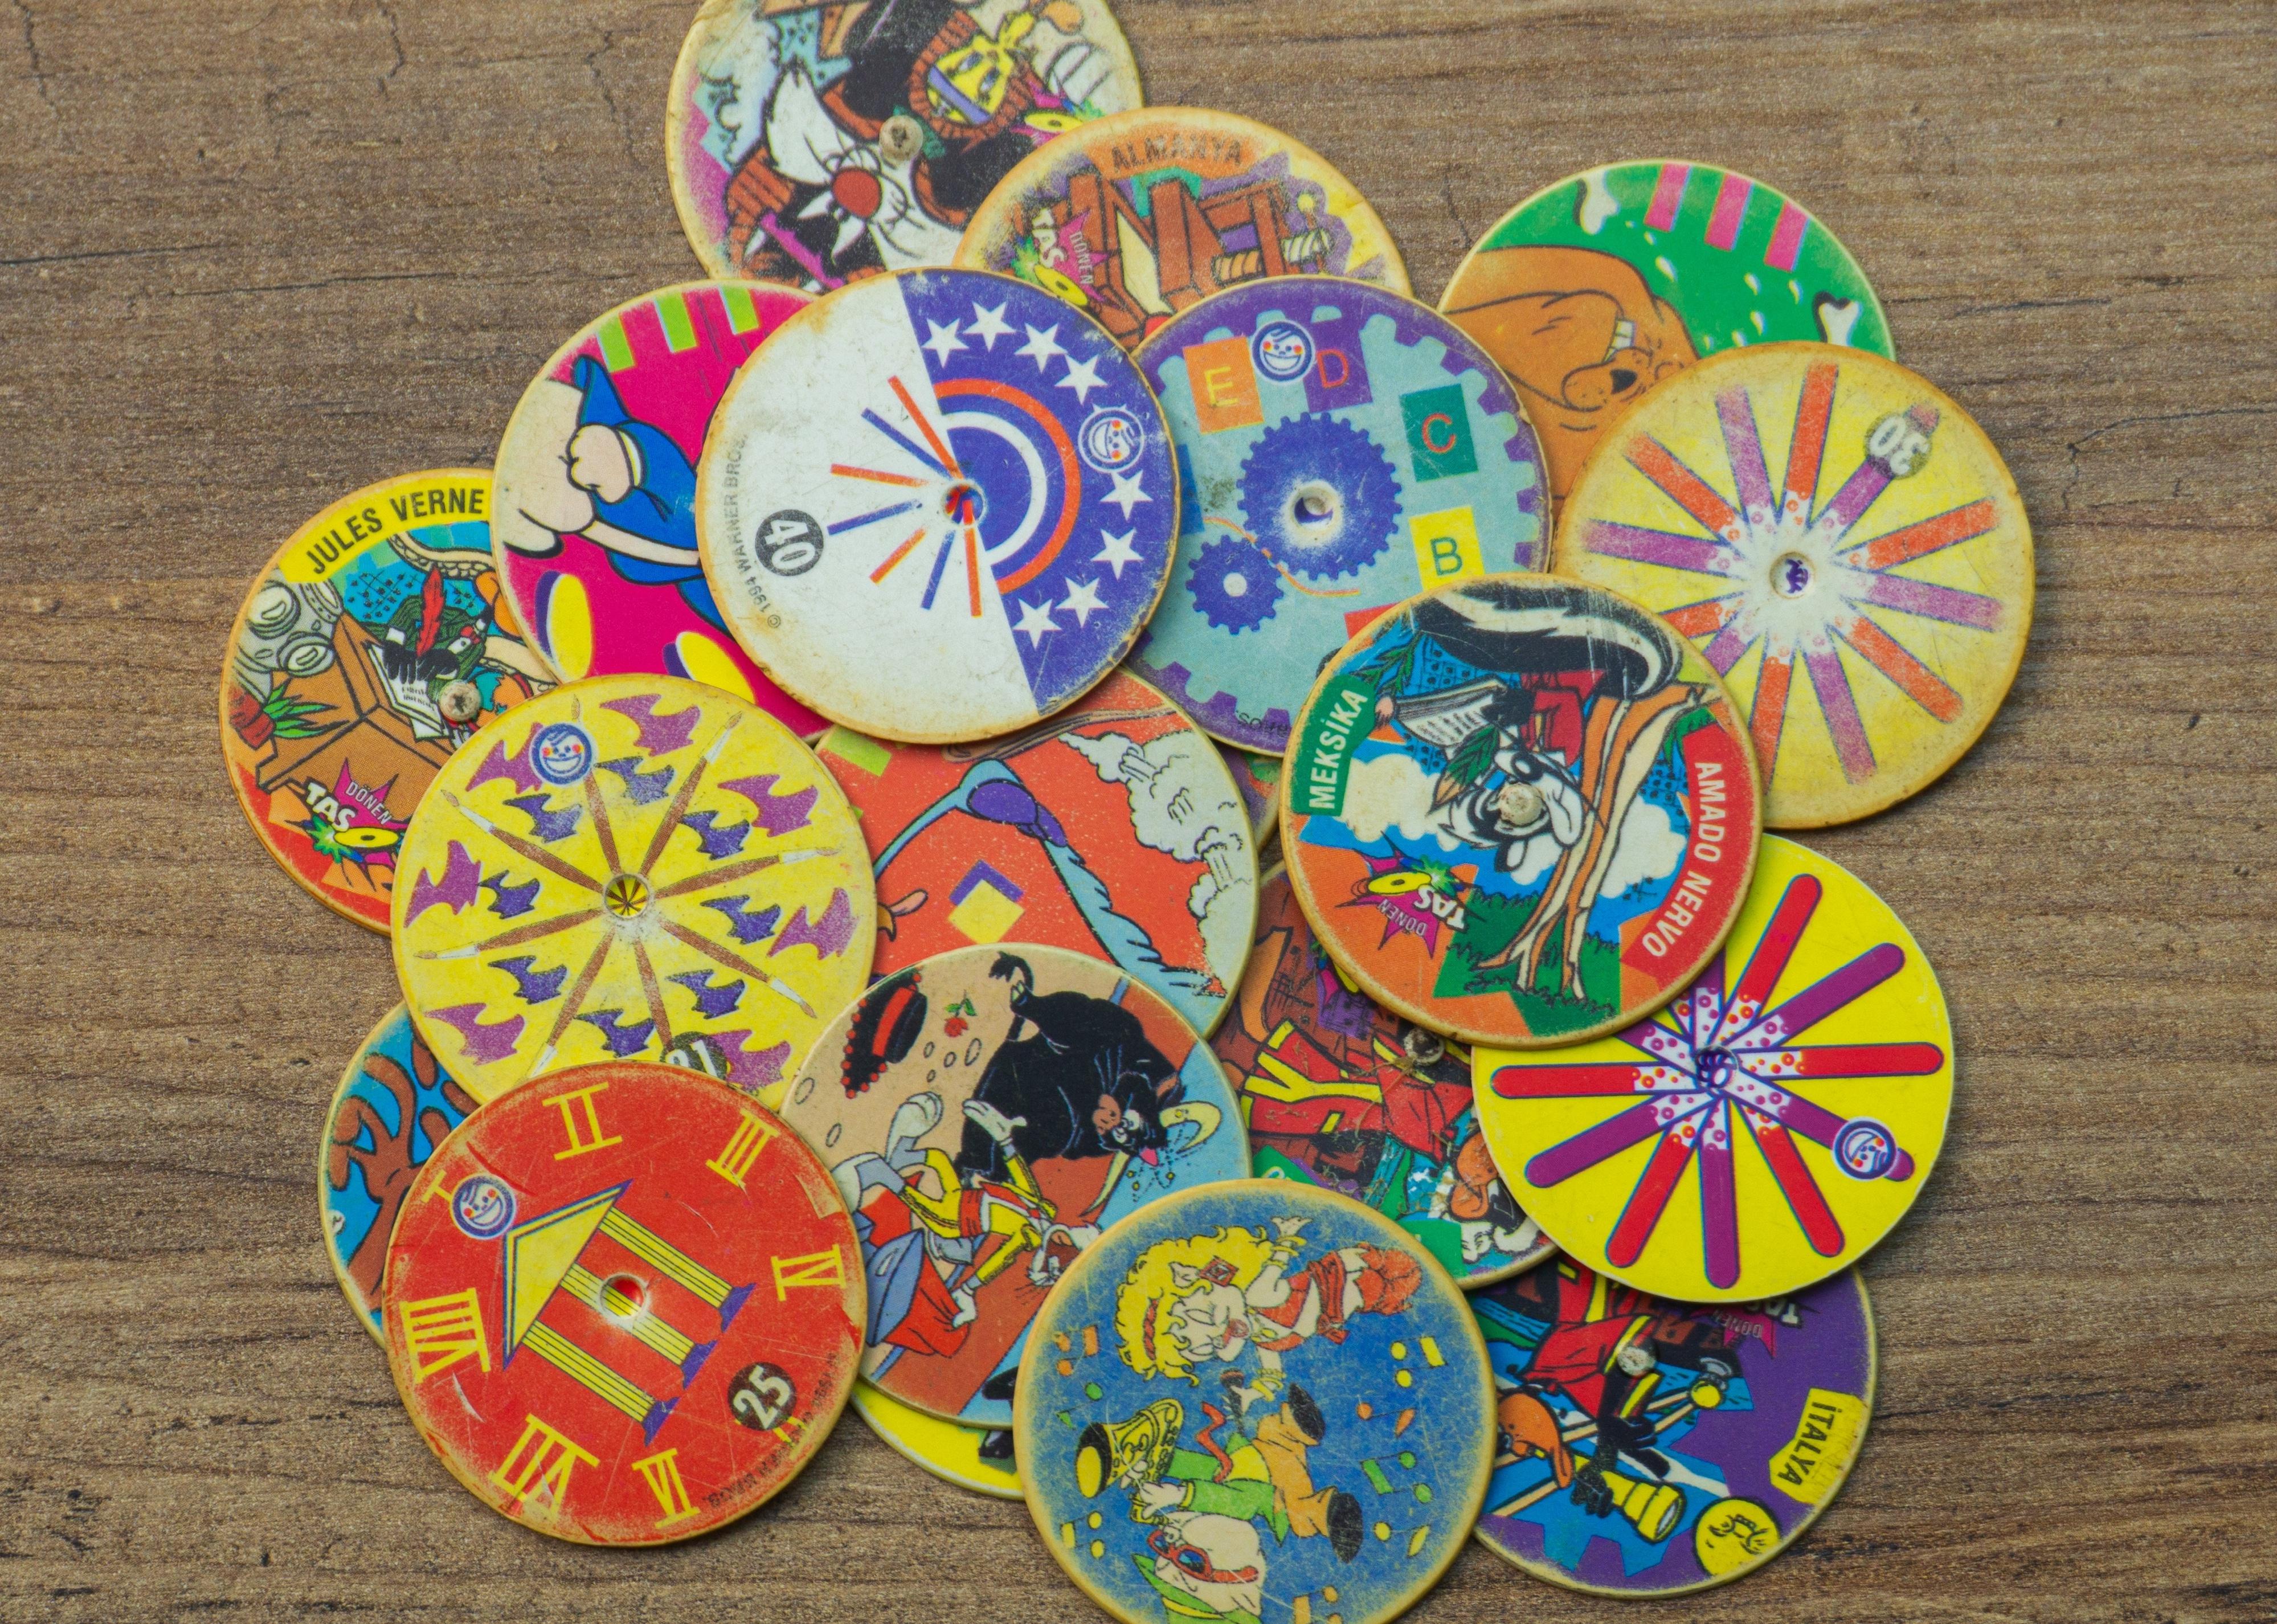 Top view of mixed Looney Tunes pogs.